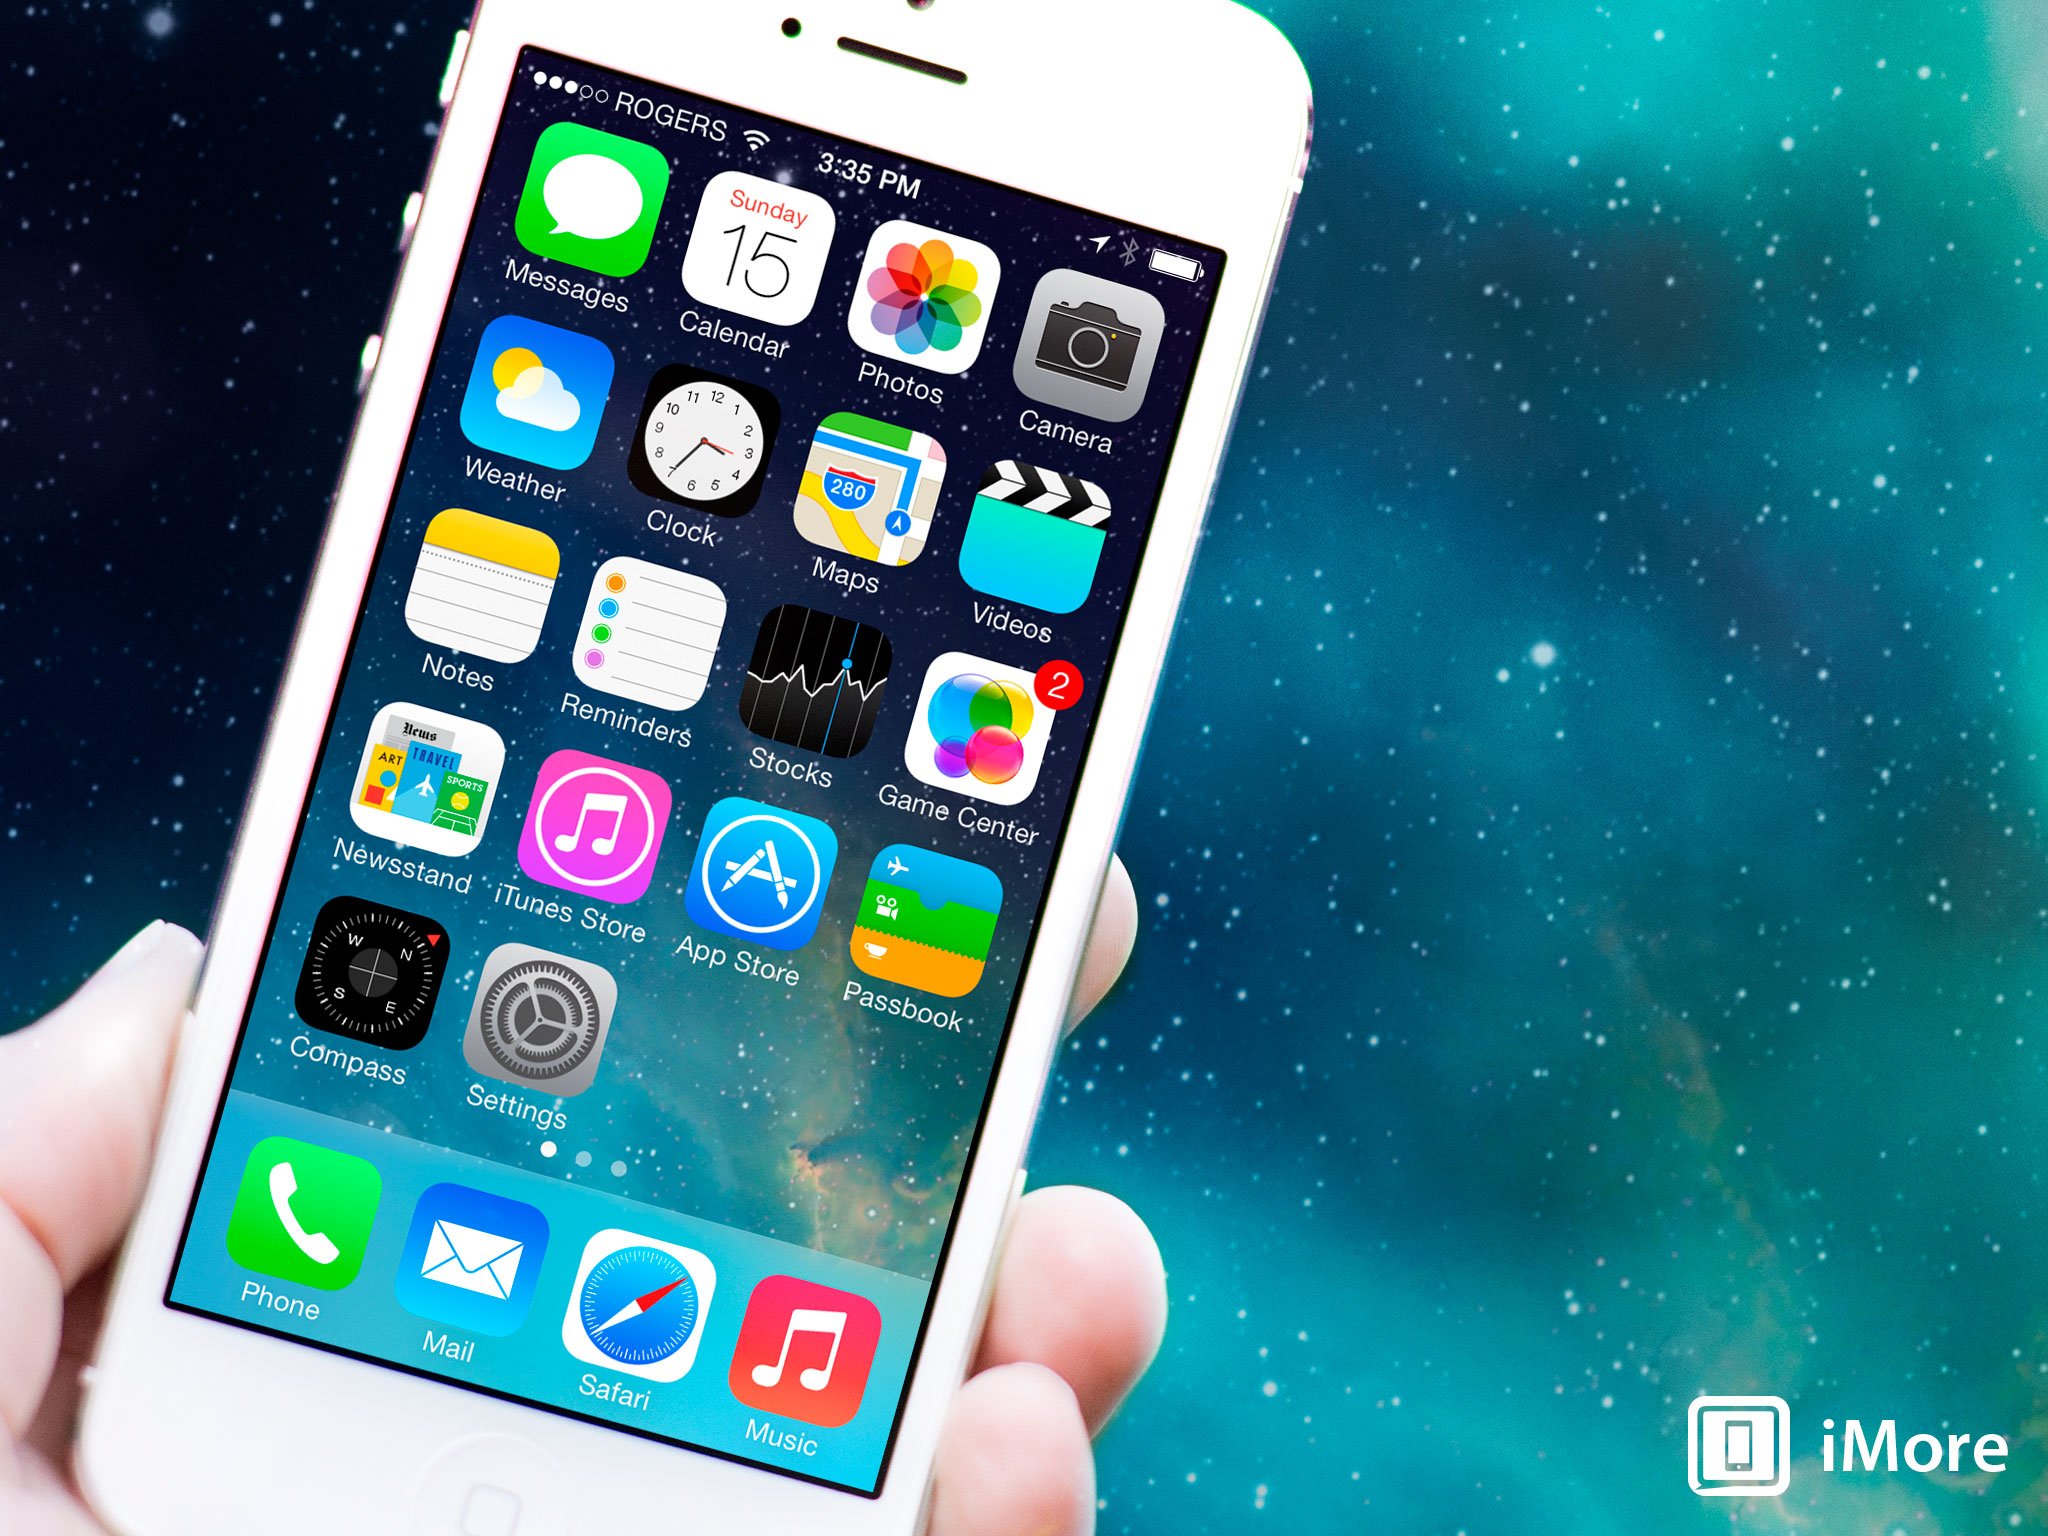 How to update your iPhone or iPad to iOS 7.1 over-the-air (OTA)